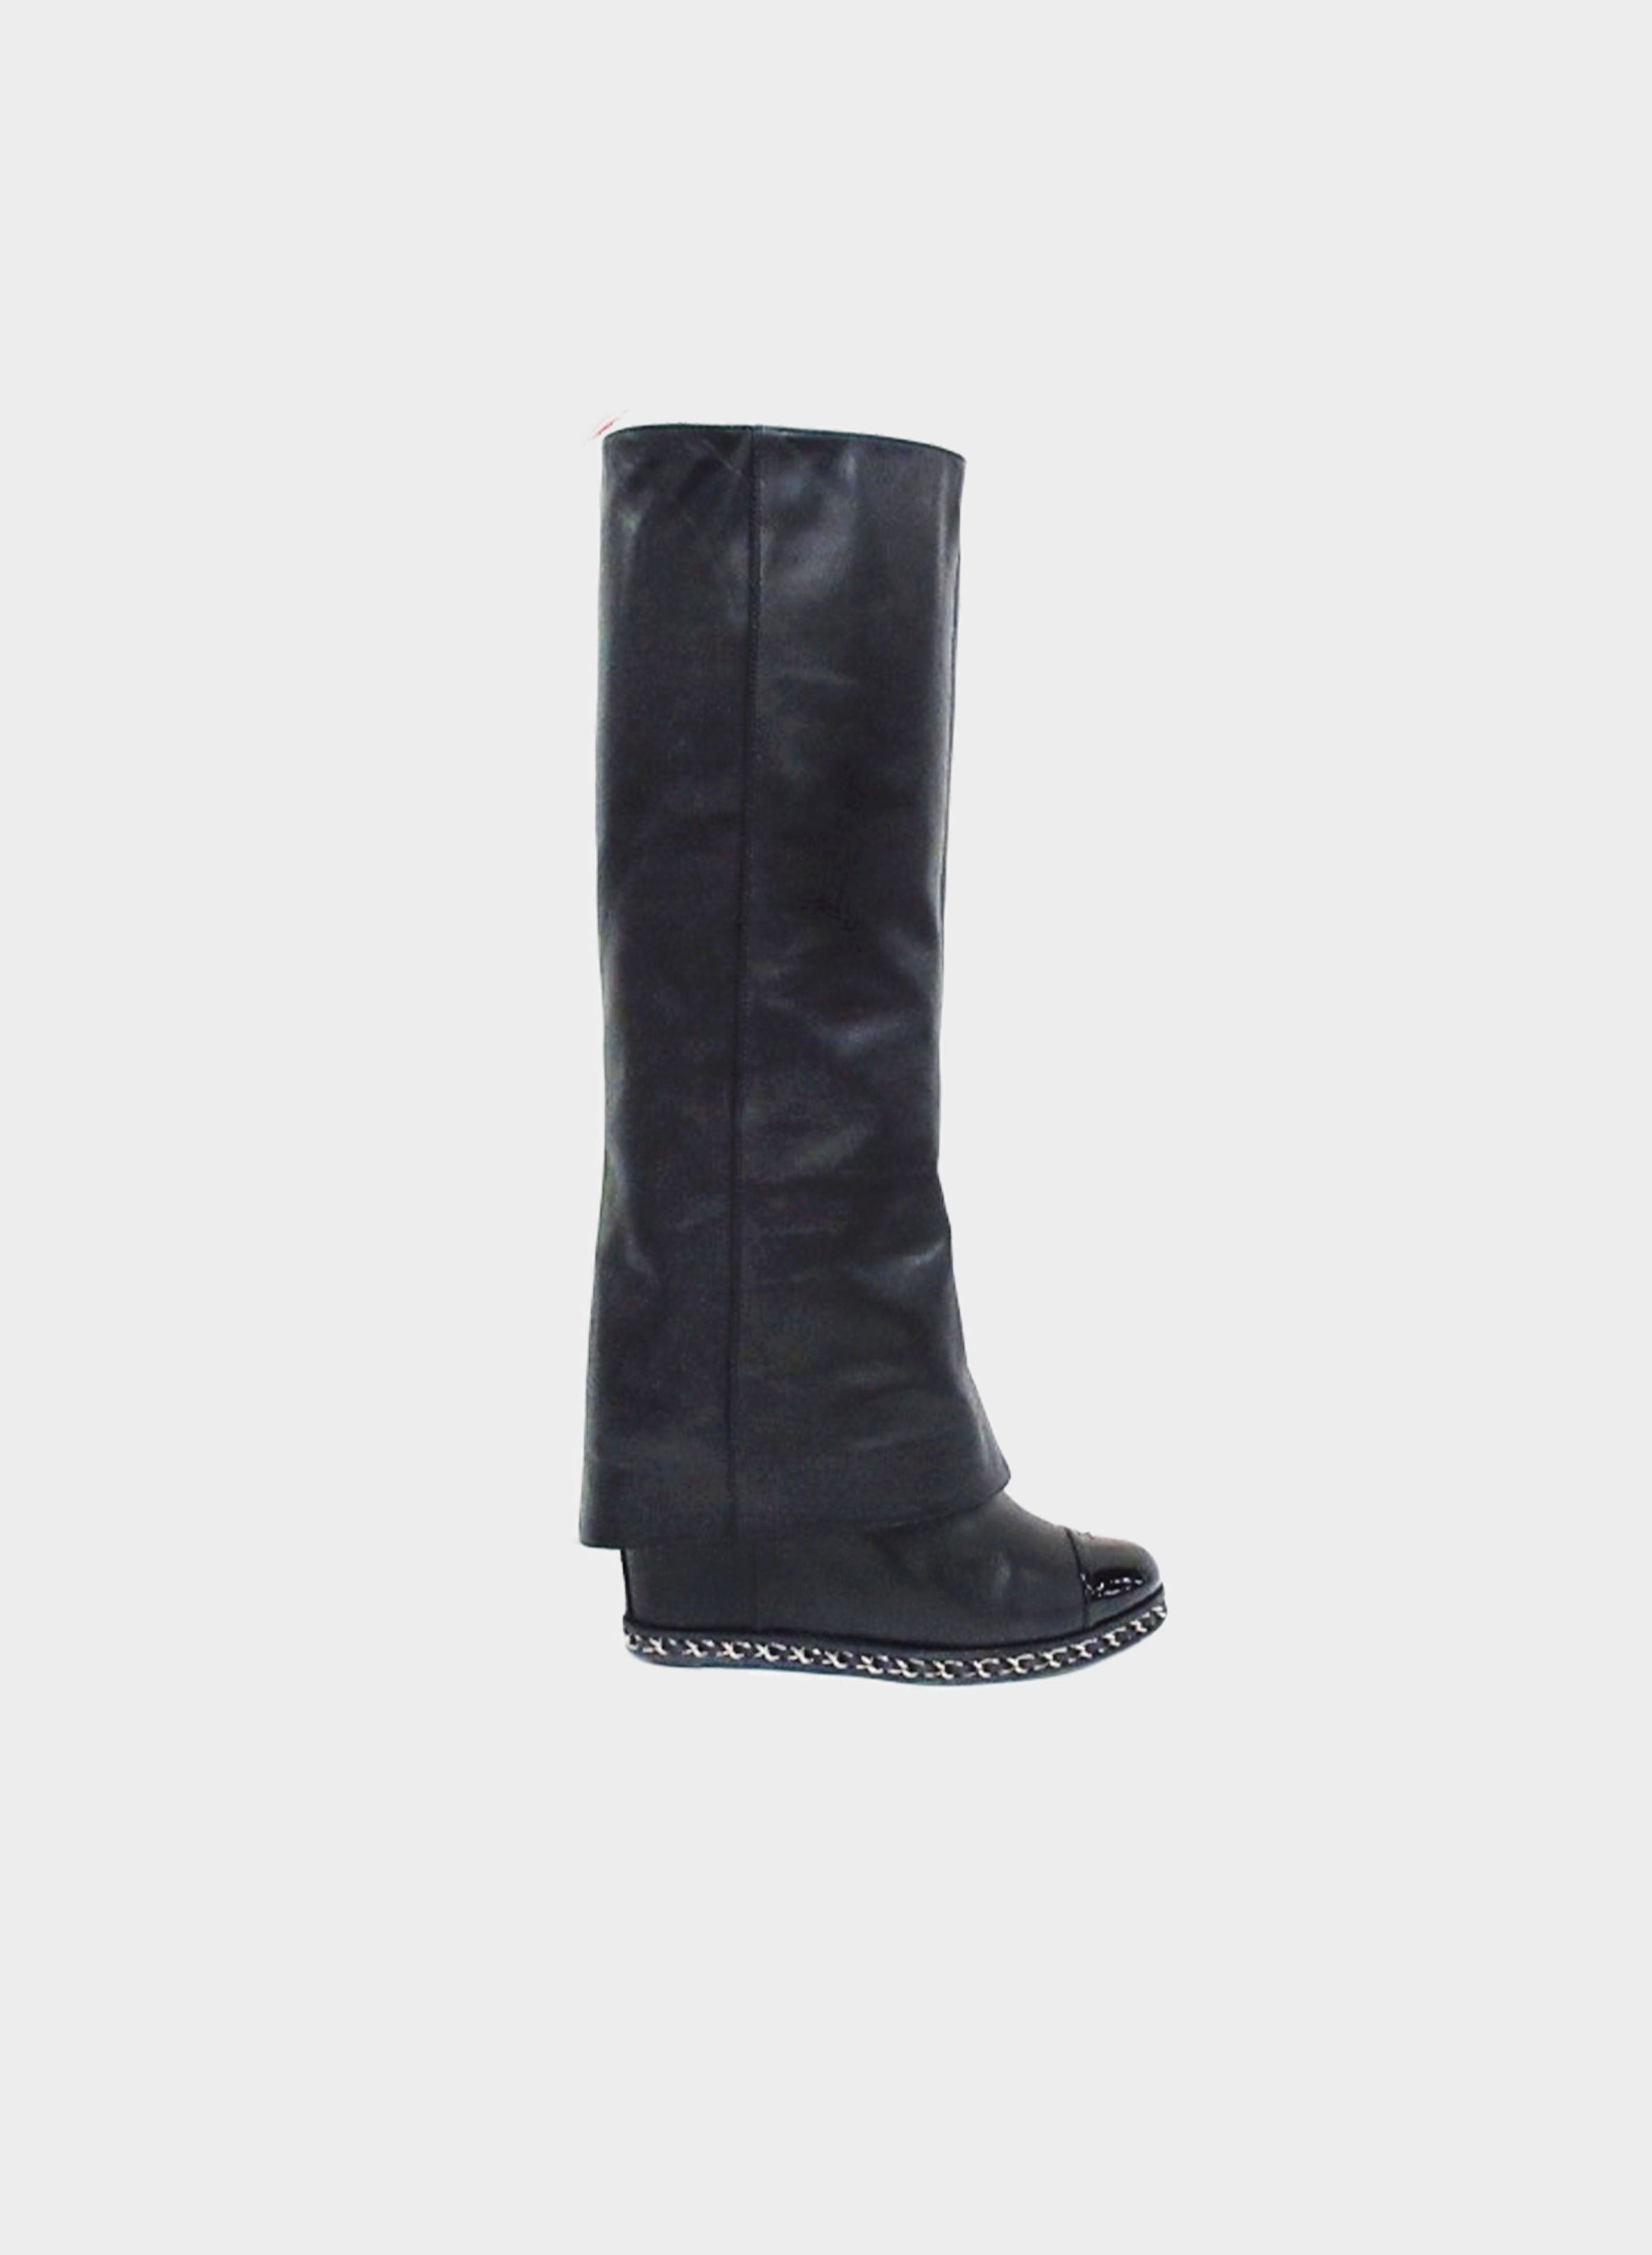 Chanel 2010s Black Leather Fold-over Wedged Long Boots · INTO